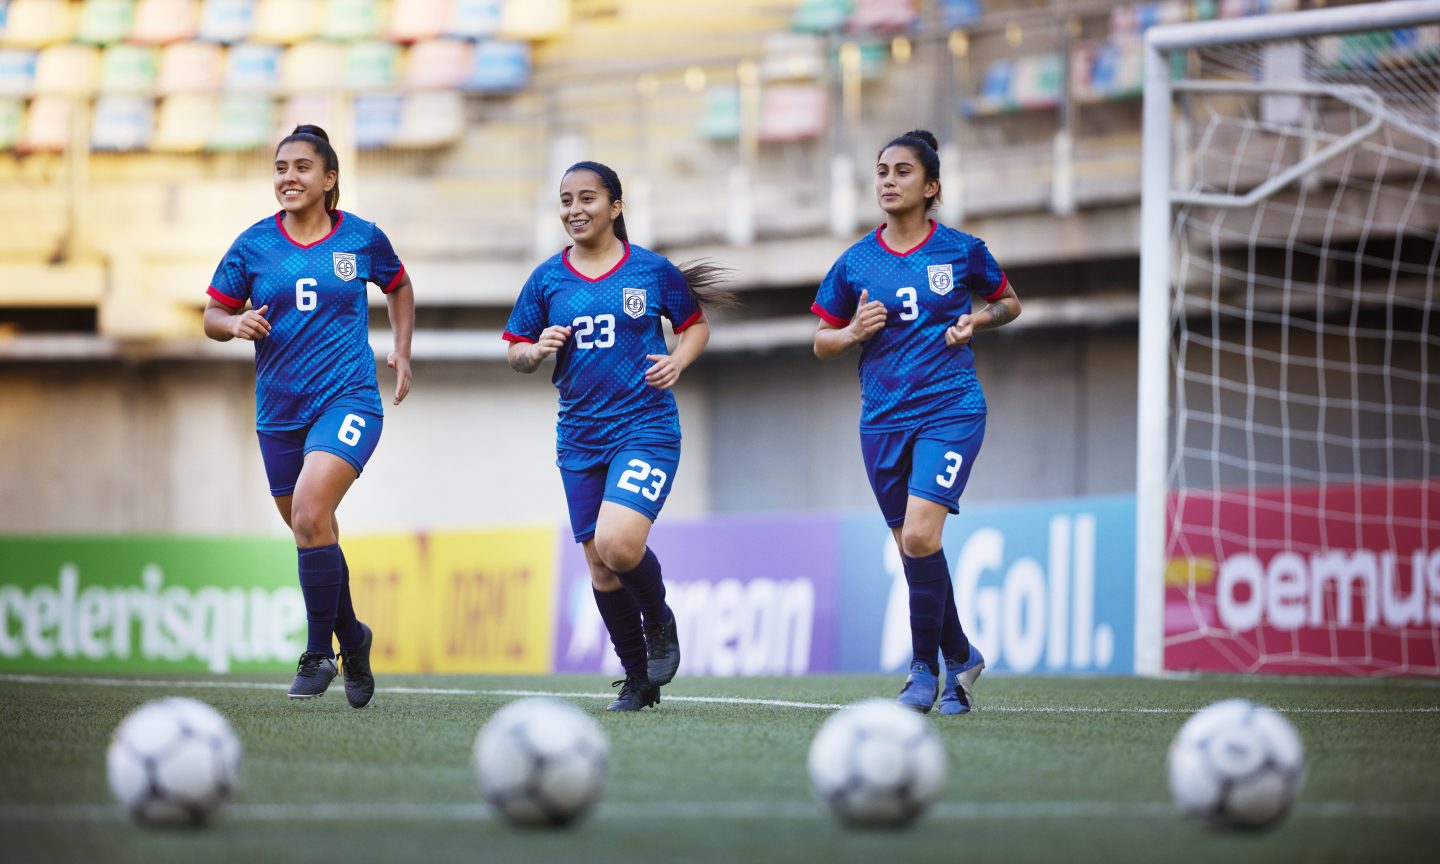 Girls’s Soccer Video games Are Approach Cheaper Than Males’s, So Cheer Them On – NerdWallet